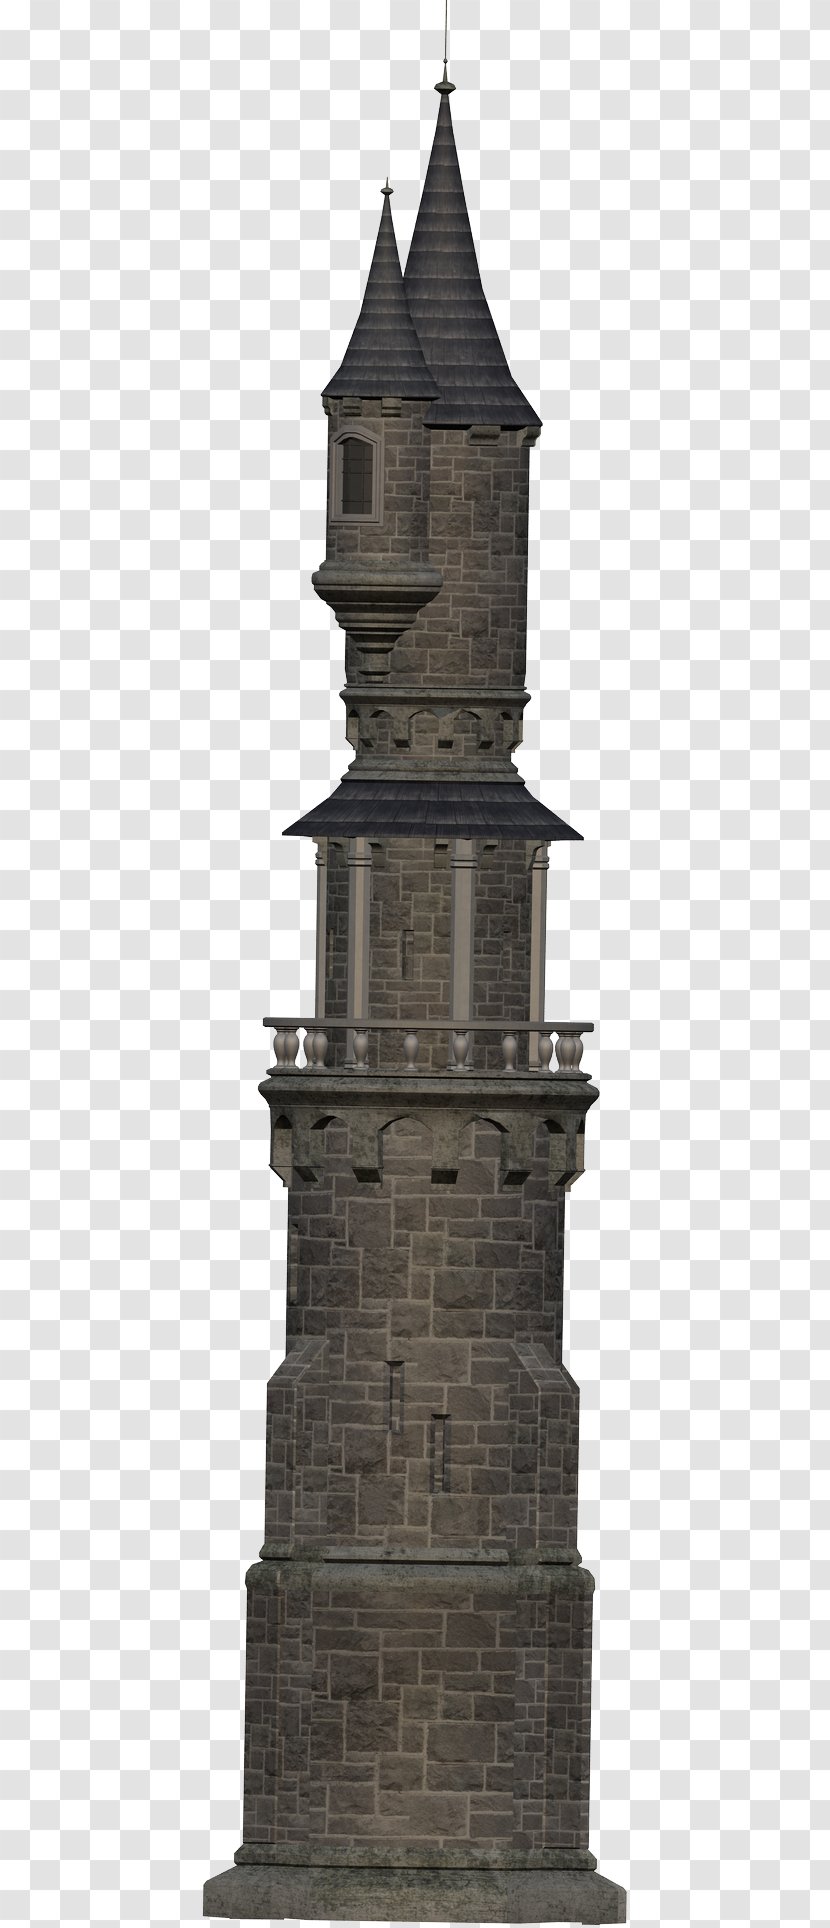 House Villa Steeple Facade Medieval Architecture - Towers Transparent PNG